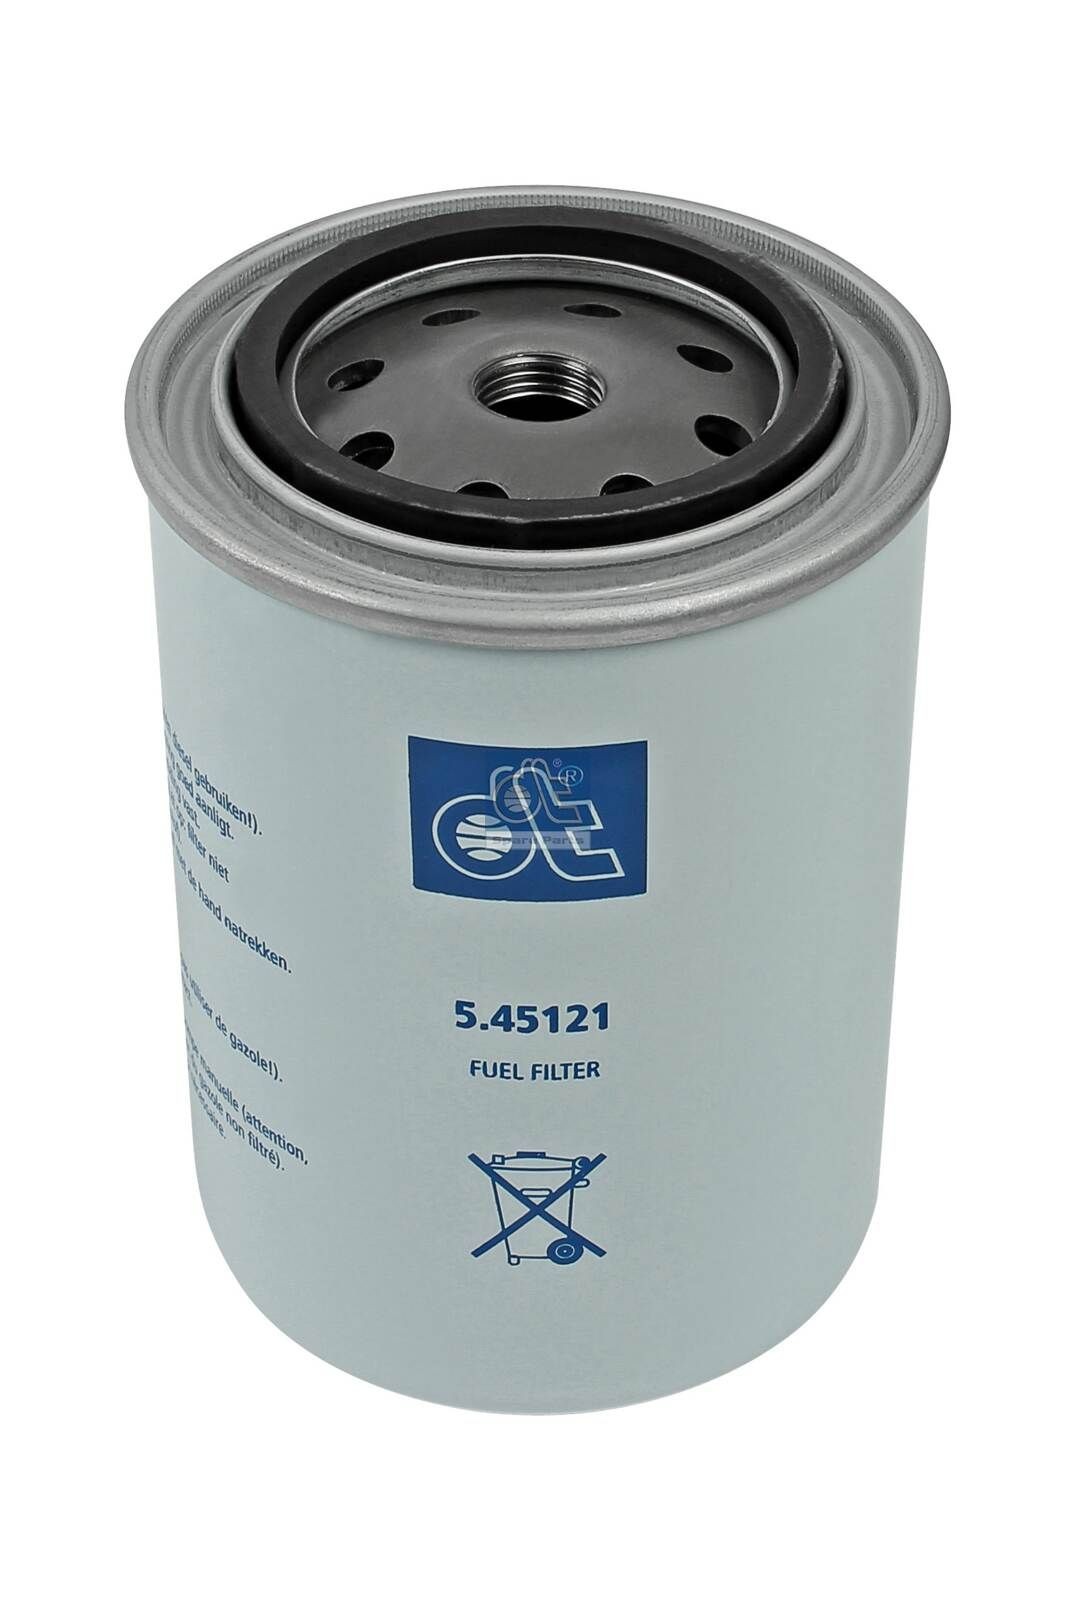 WDK 940/5 DT Spare Parts 5.45121 Fuel filter 243 000